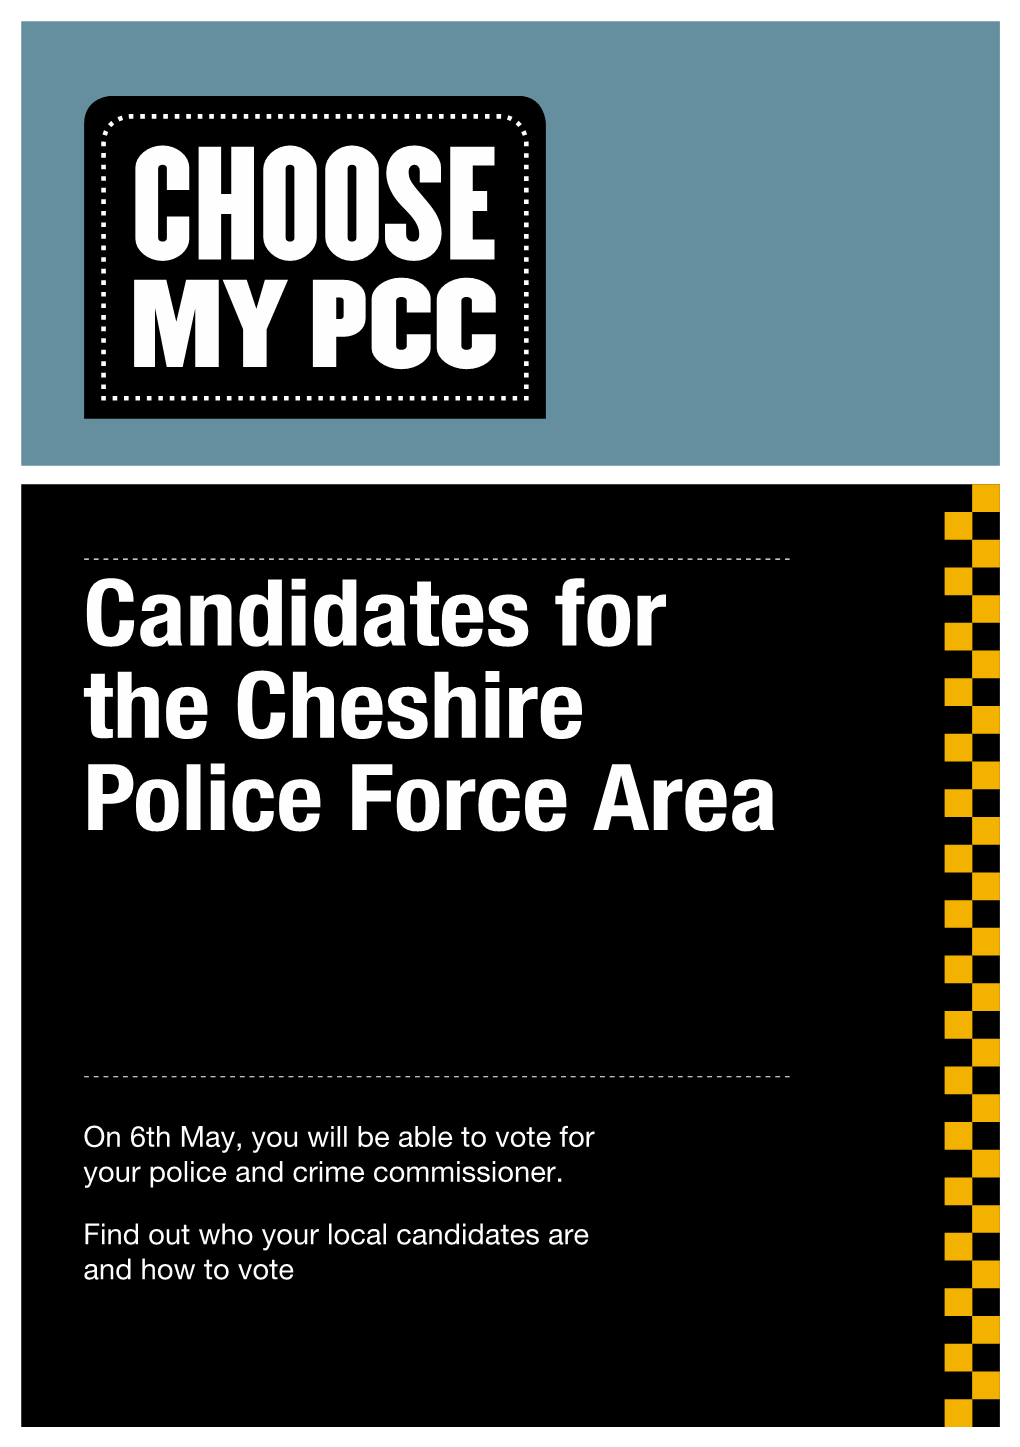 Candidates for the Cheshire Police Force Area